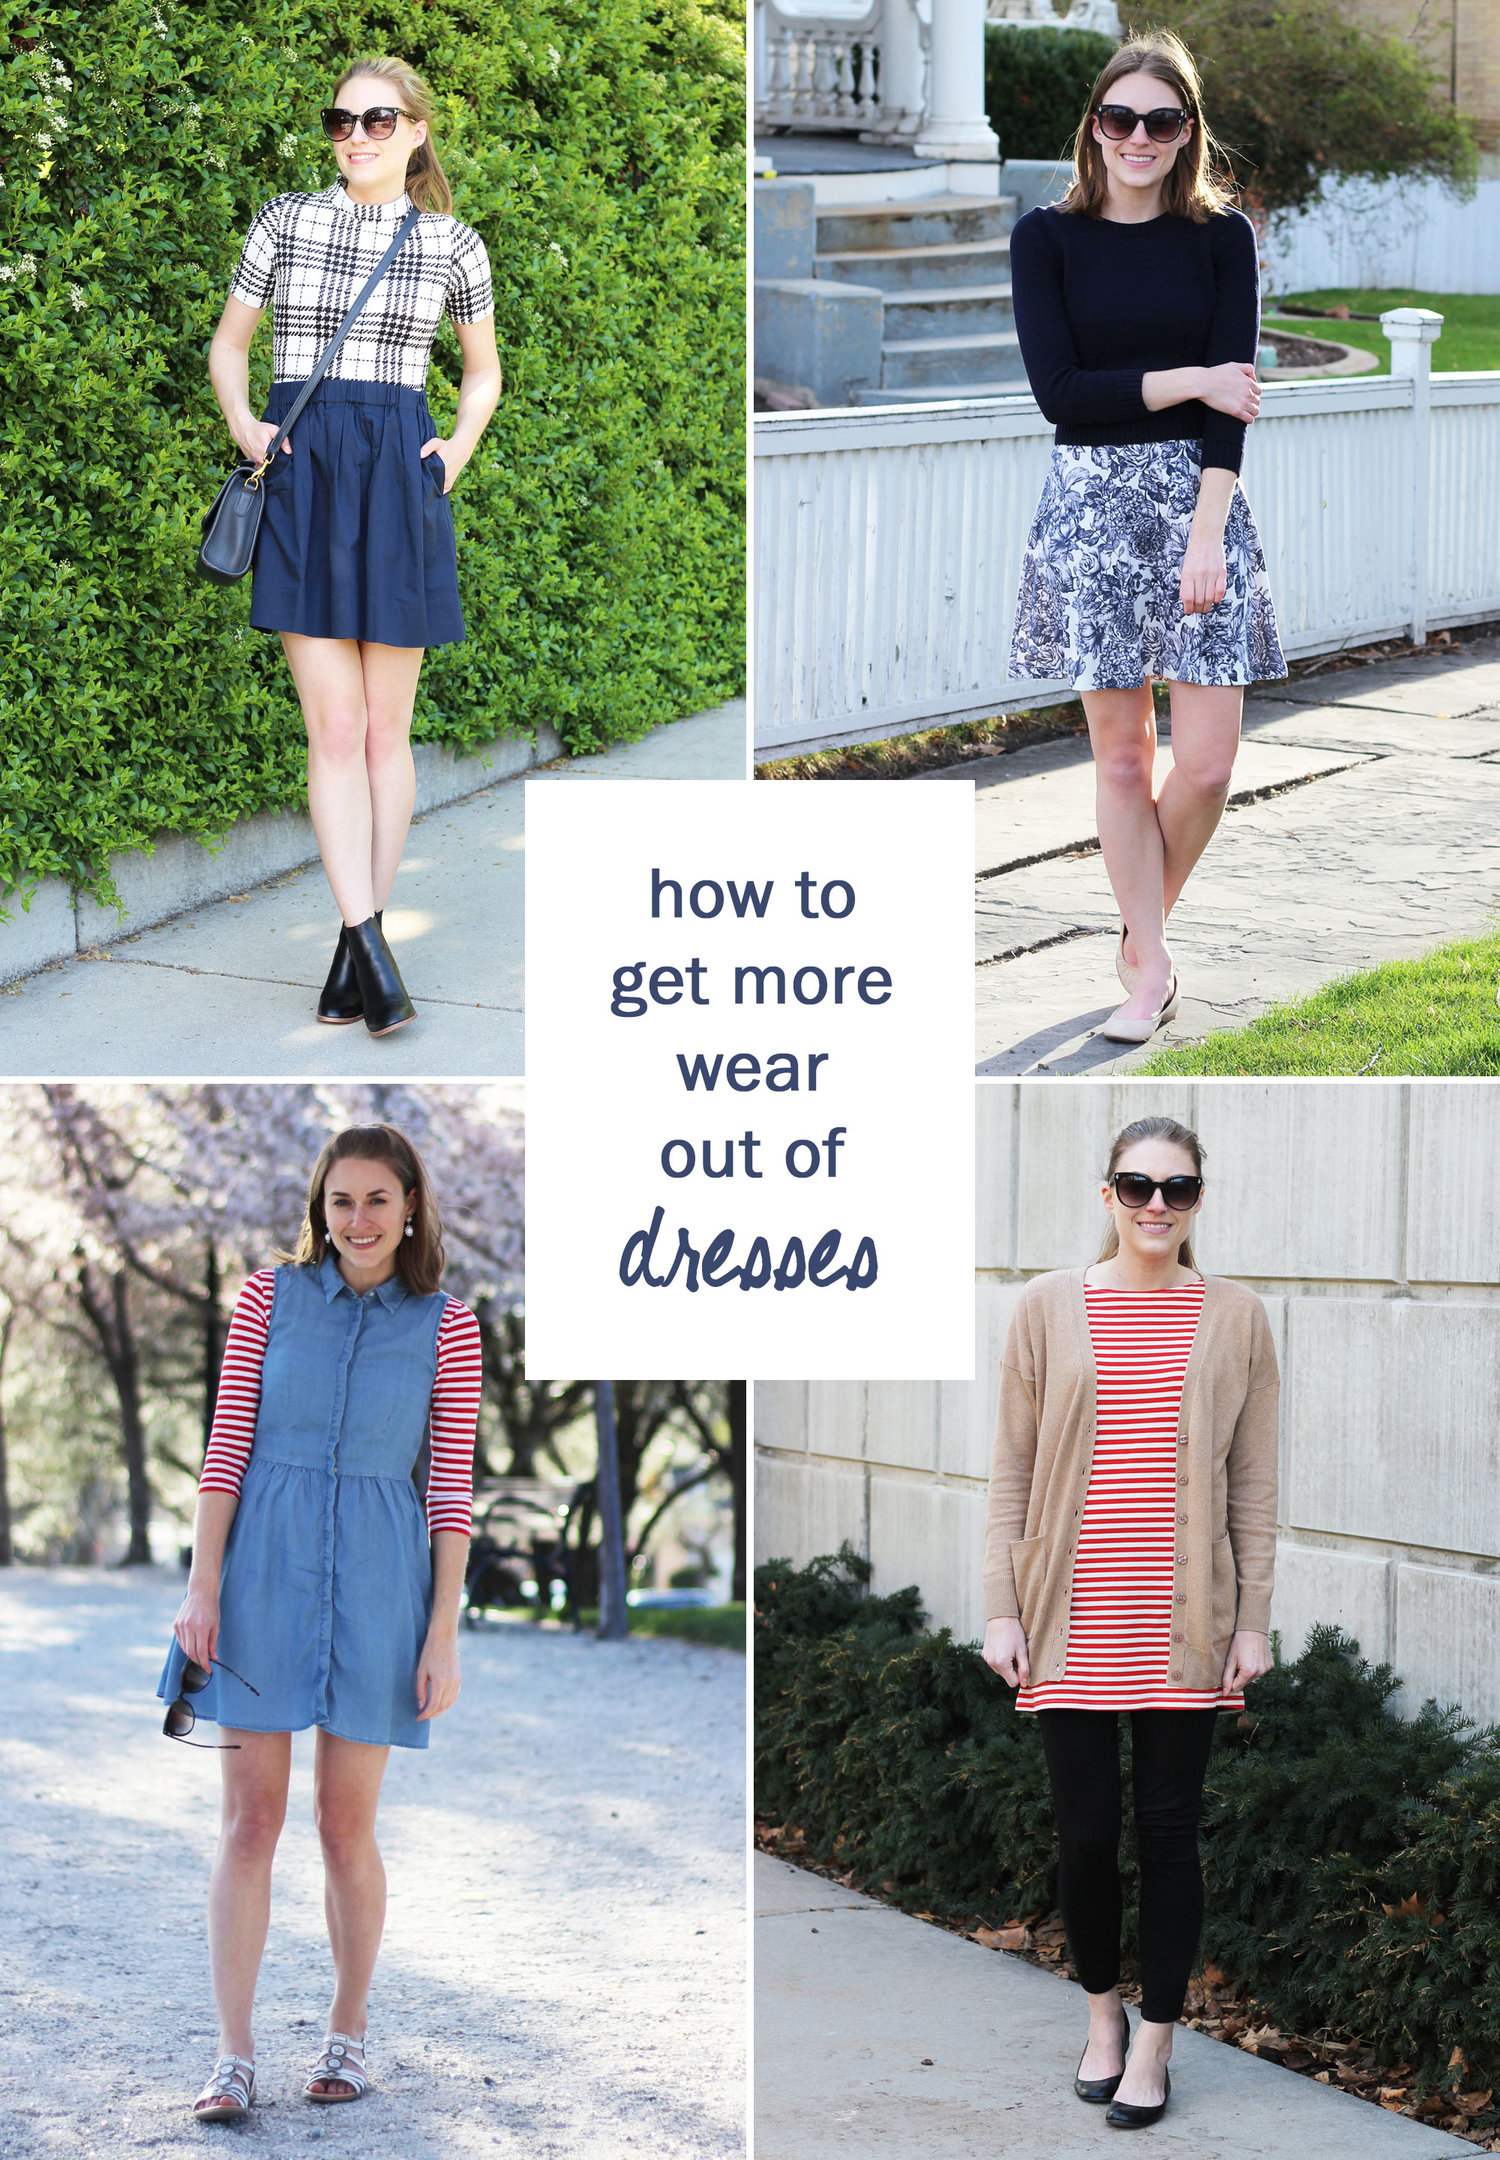 How to get more wear out of dresses